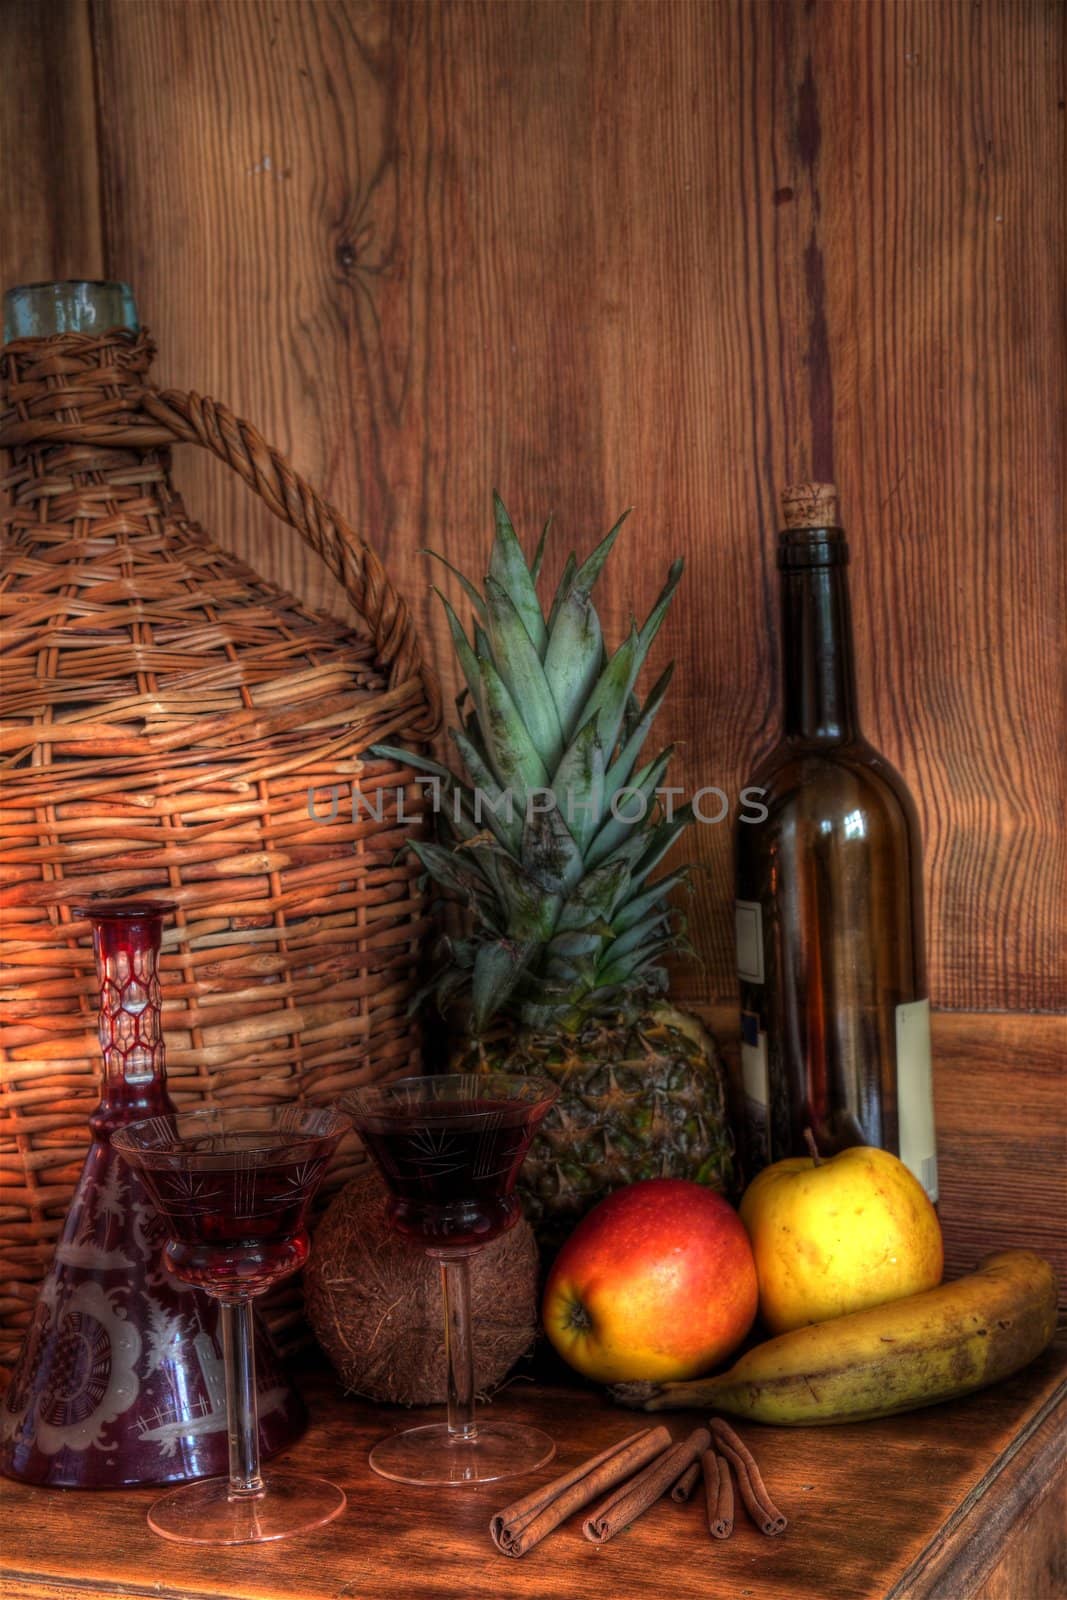 Wine in glasses,bottle,fruits,candle light,decanter,wicker basket on wooden background.